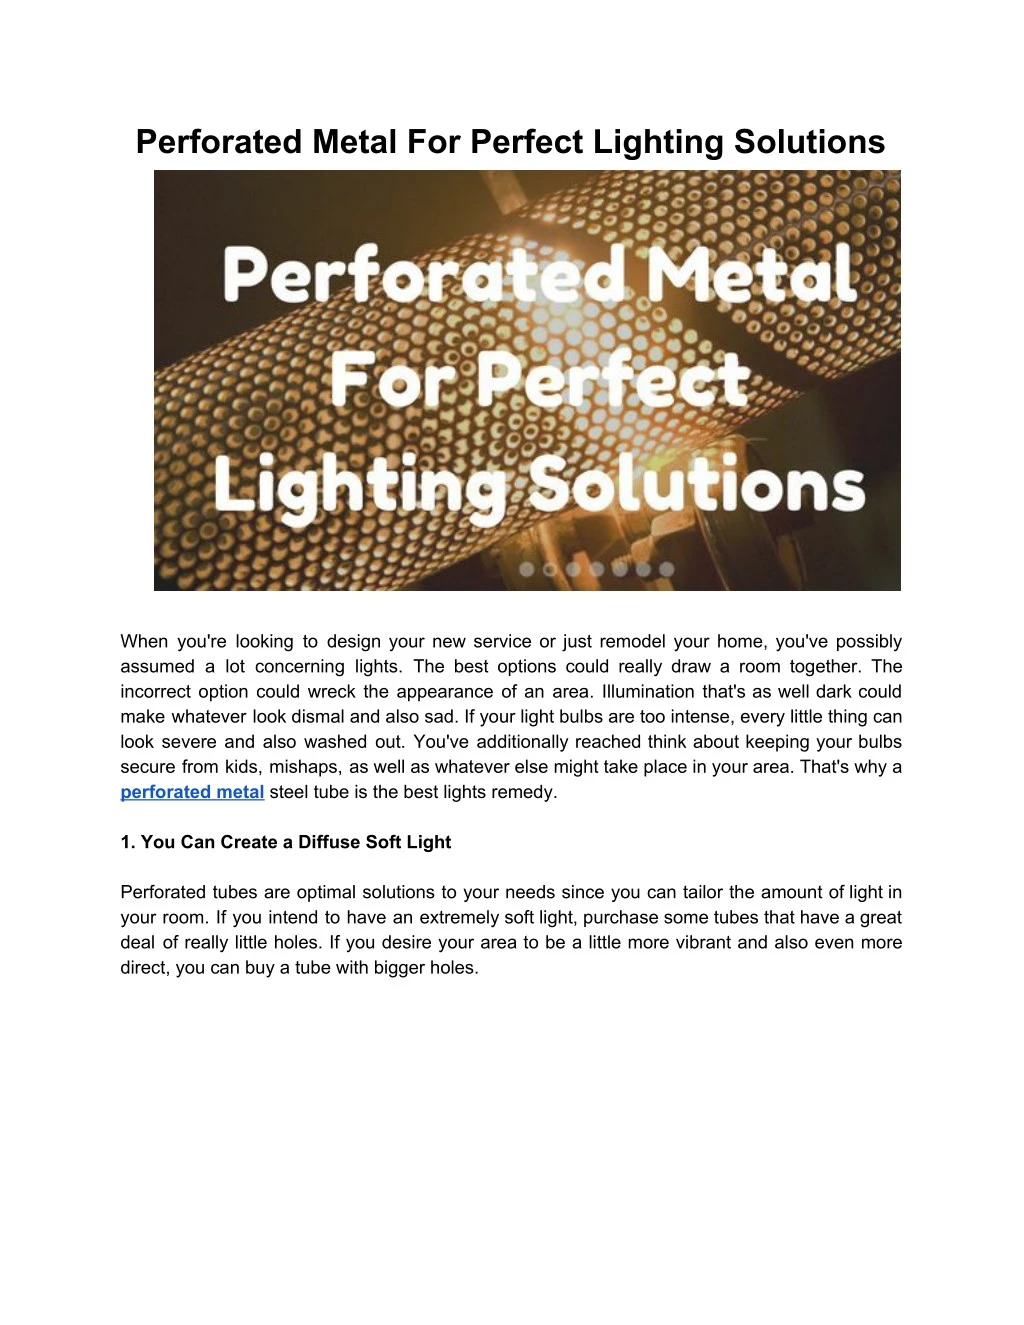 perforated metal for perfect lighting solutions